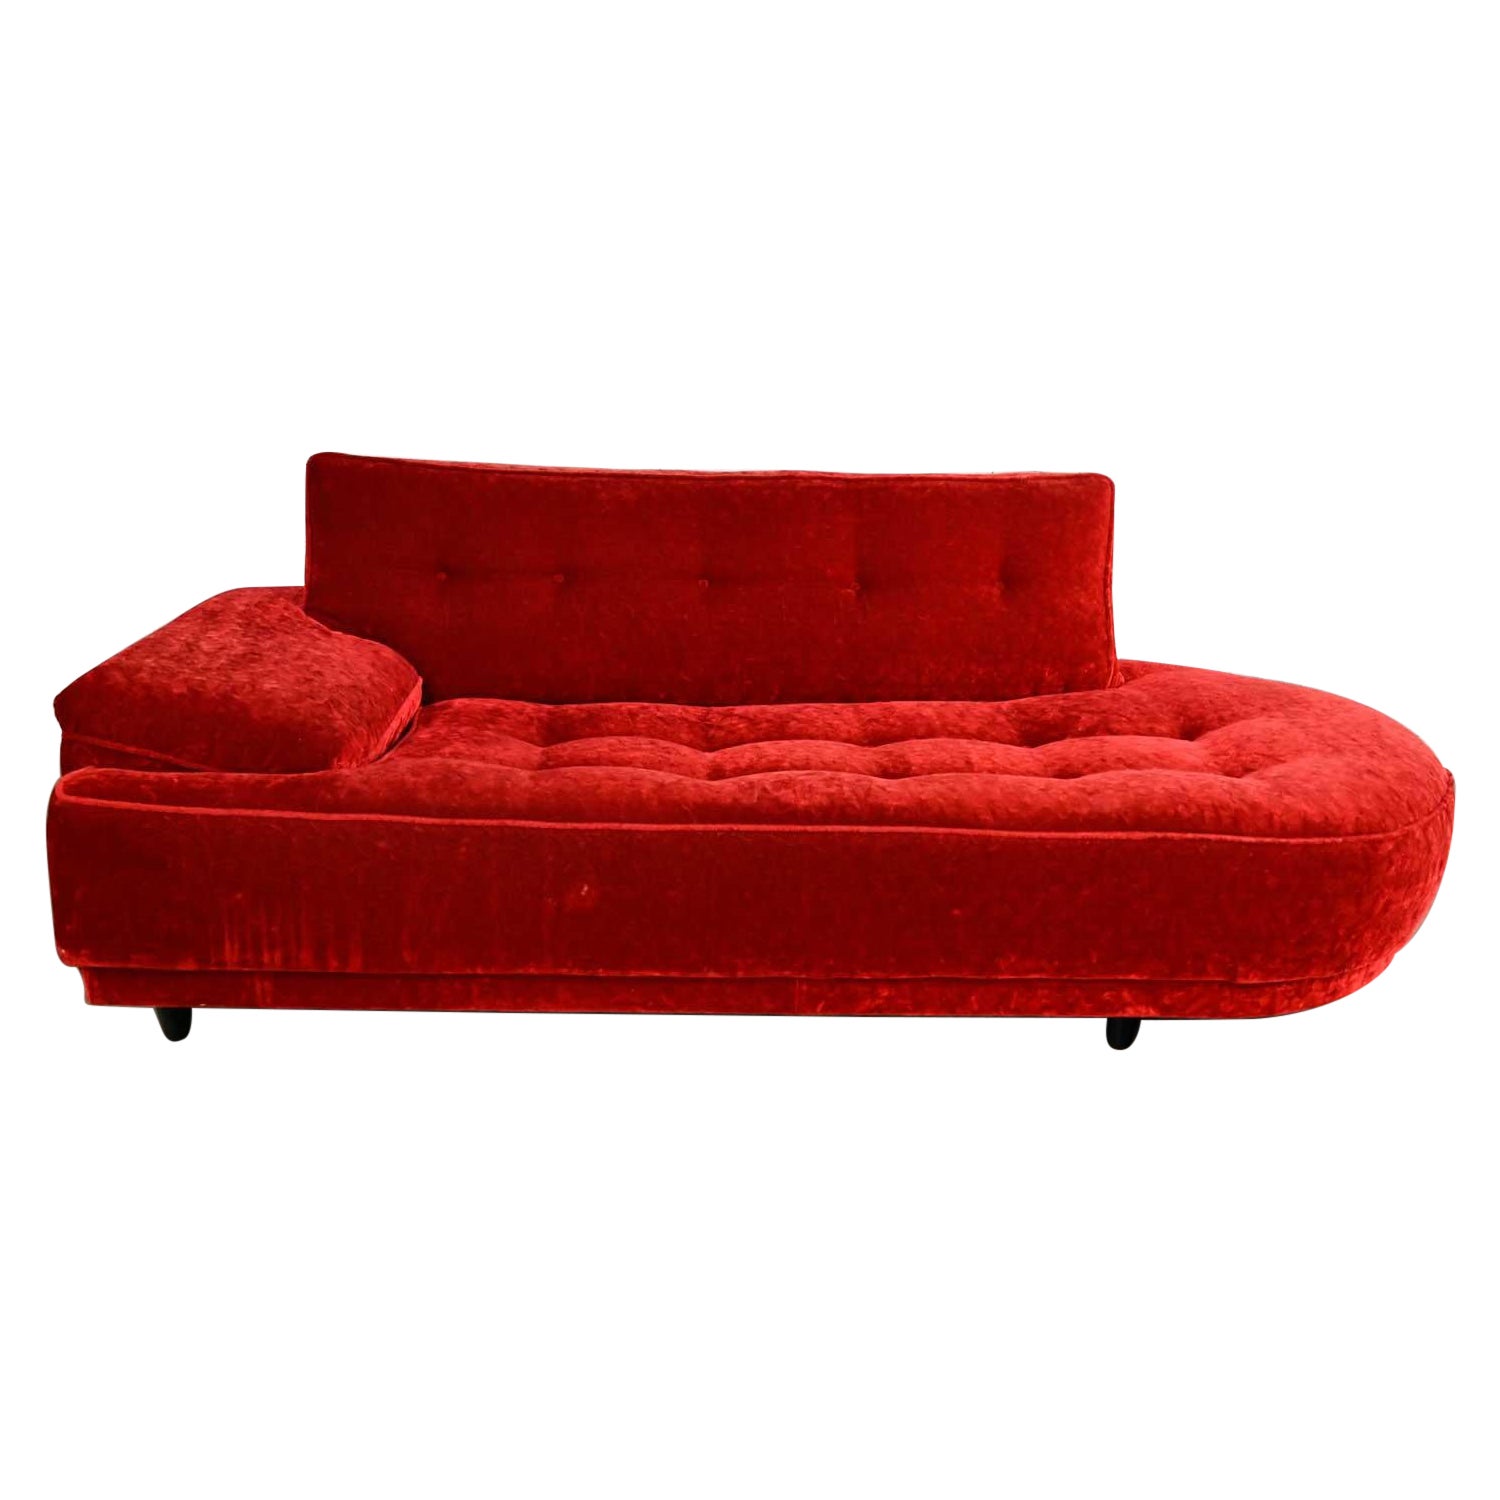 Mid Century Hollywood Regency Art Deco Style Crushed Red Velvet Chaise Lounge